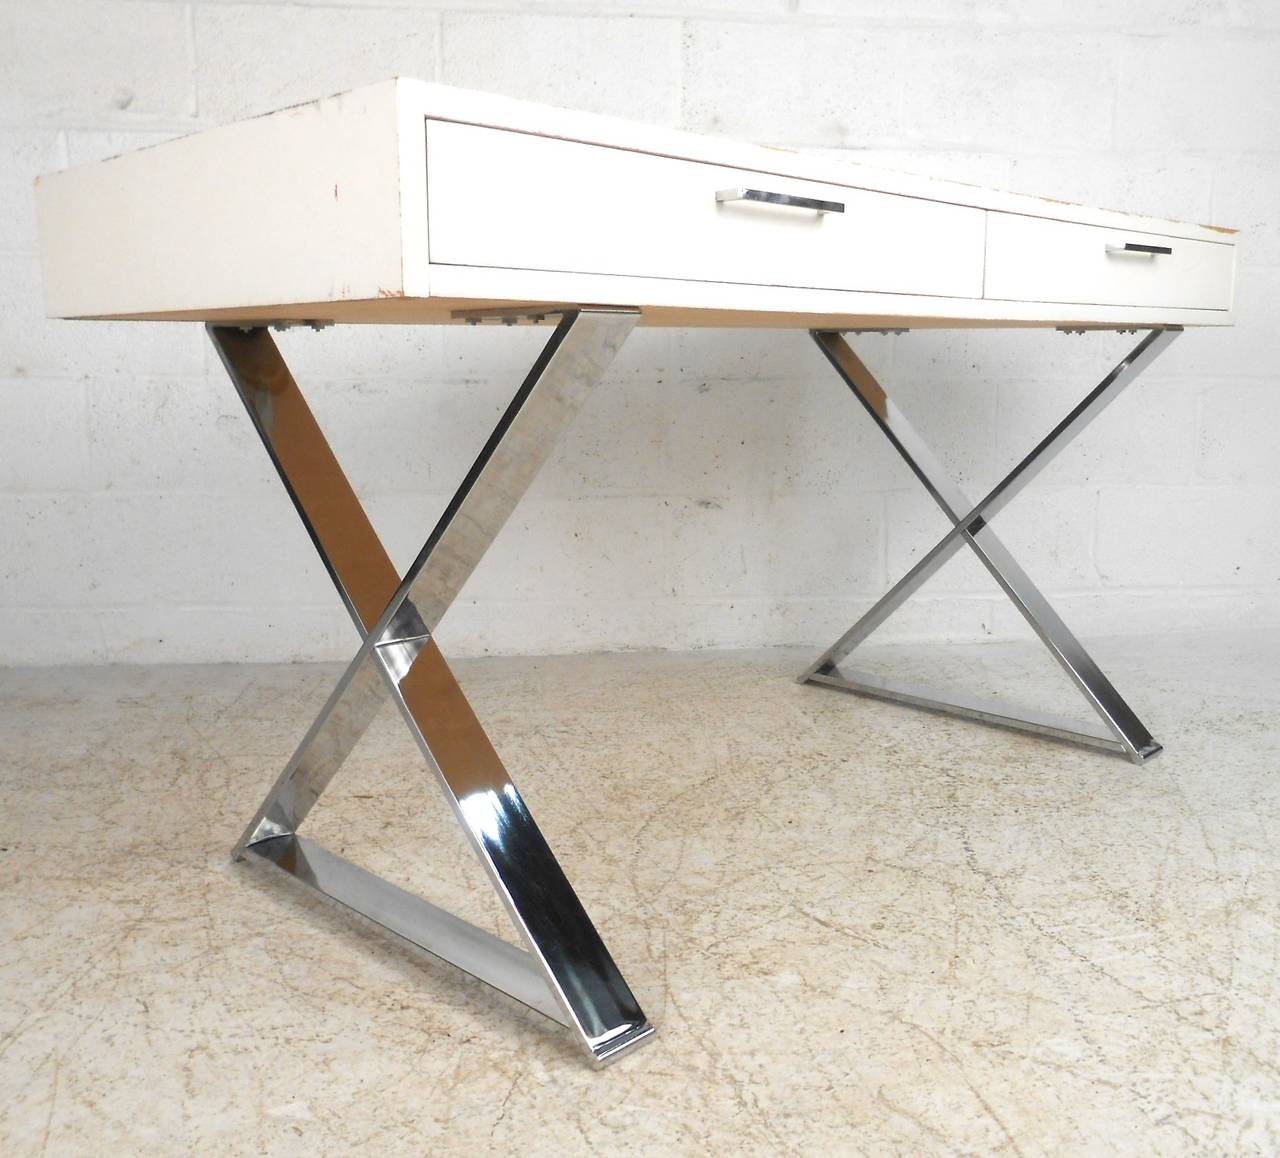 This unique vintage desk features a unique chrome base topped with a large workspace perfect for any setting. Pair of drawers offer added storage, wonderful addition to home or office. Please confirm item location (NY or NJ).